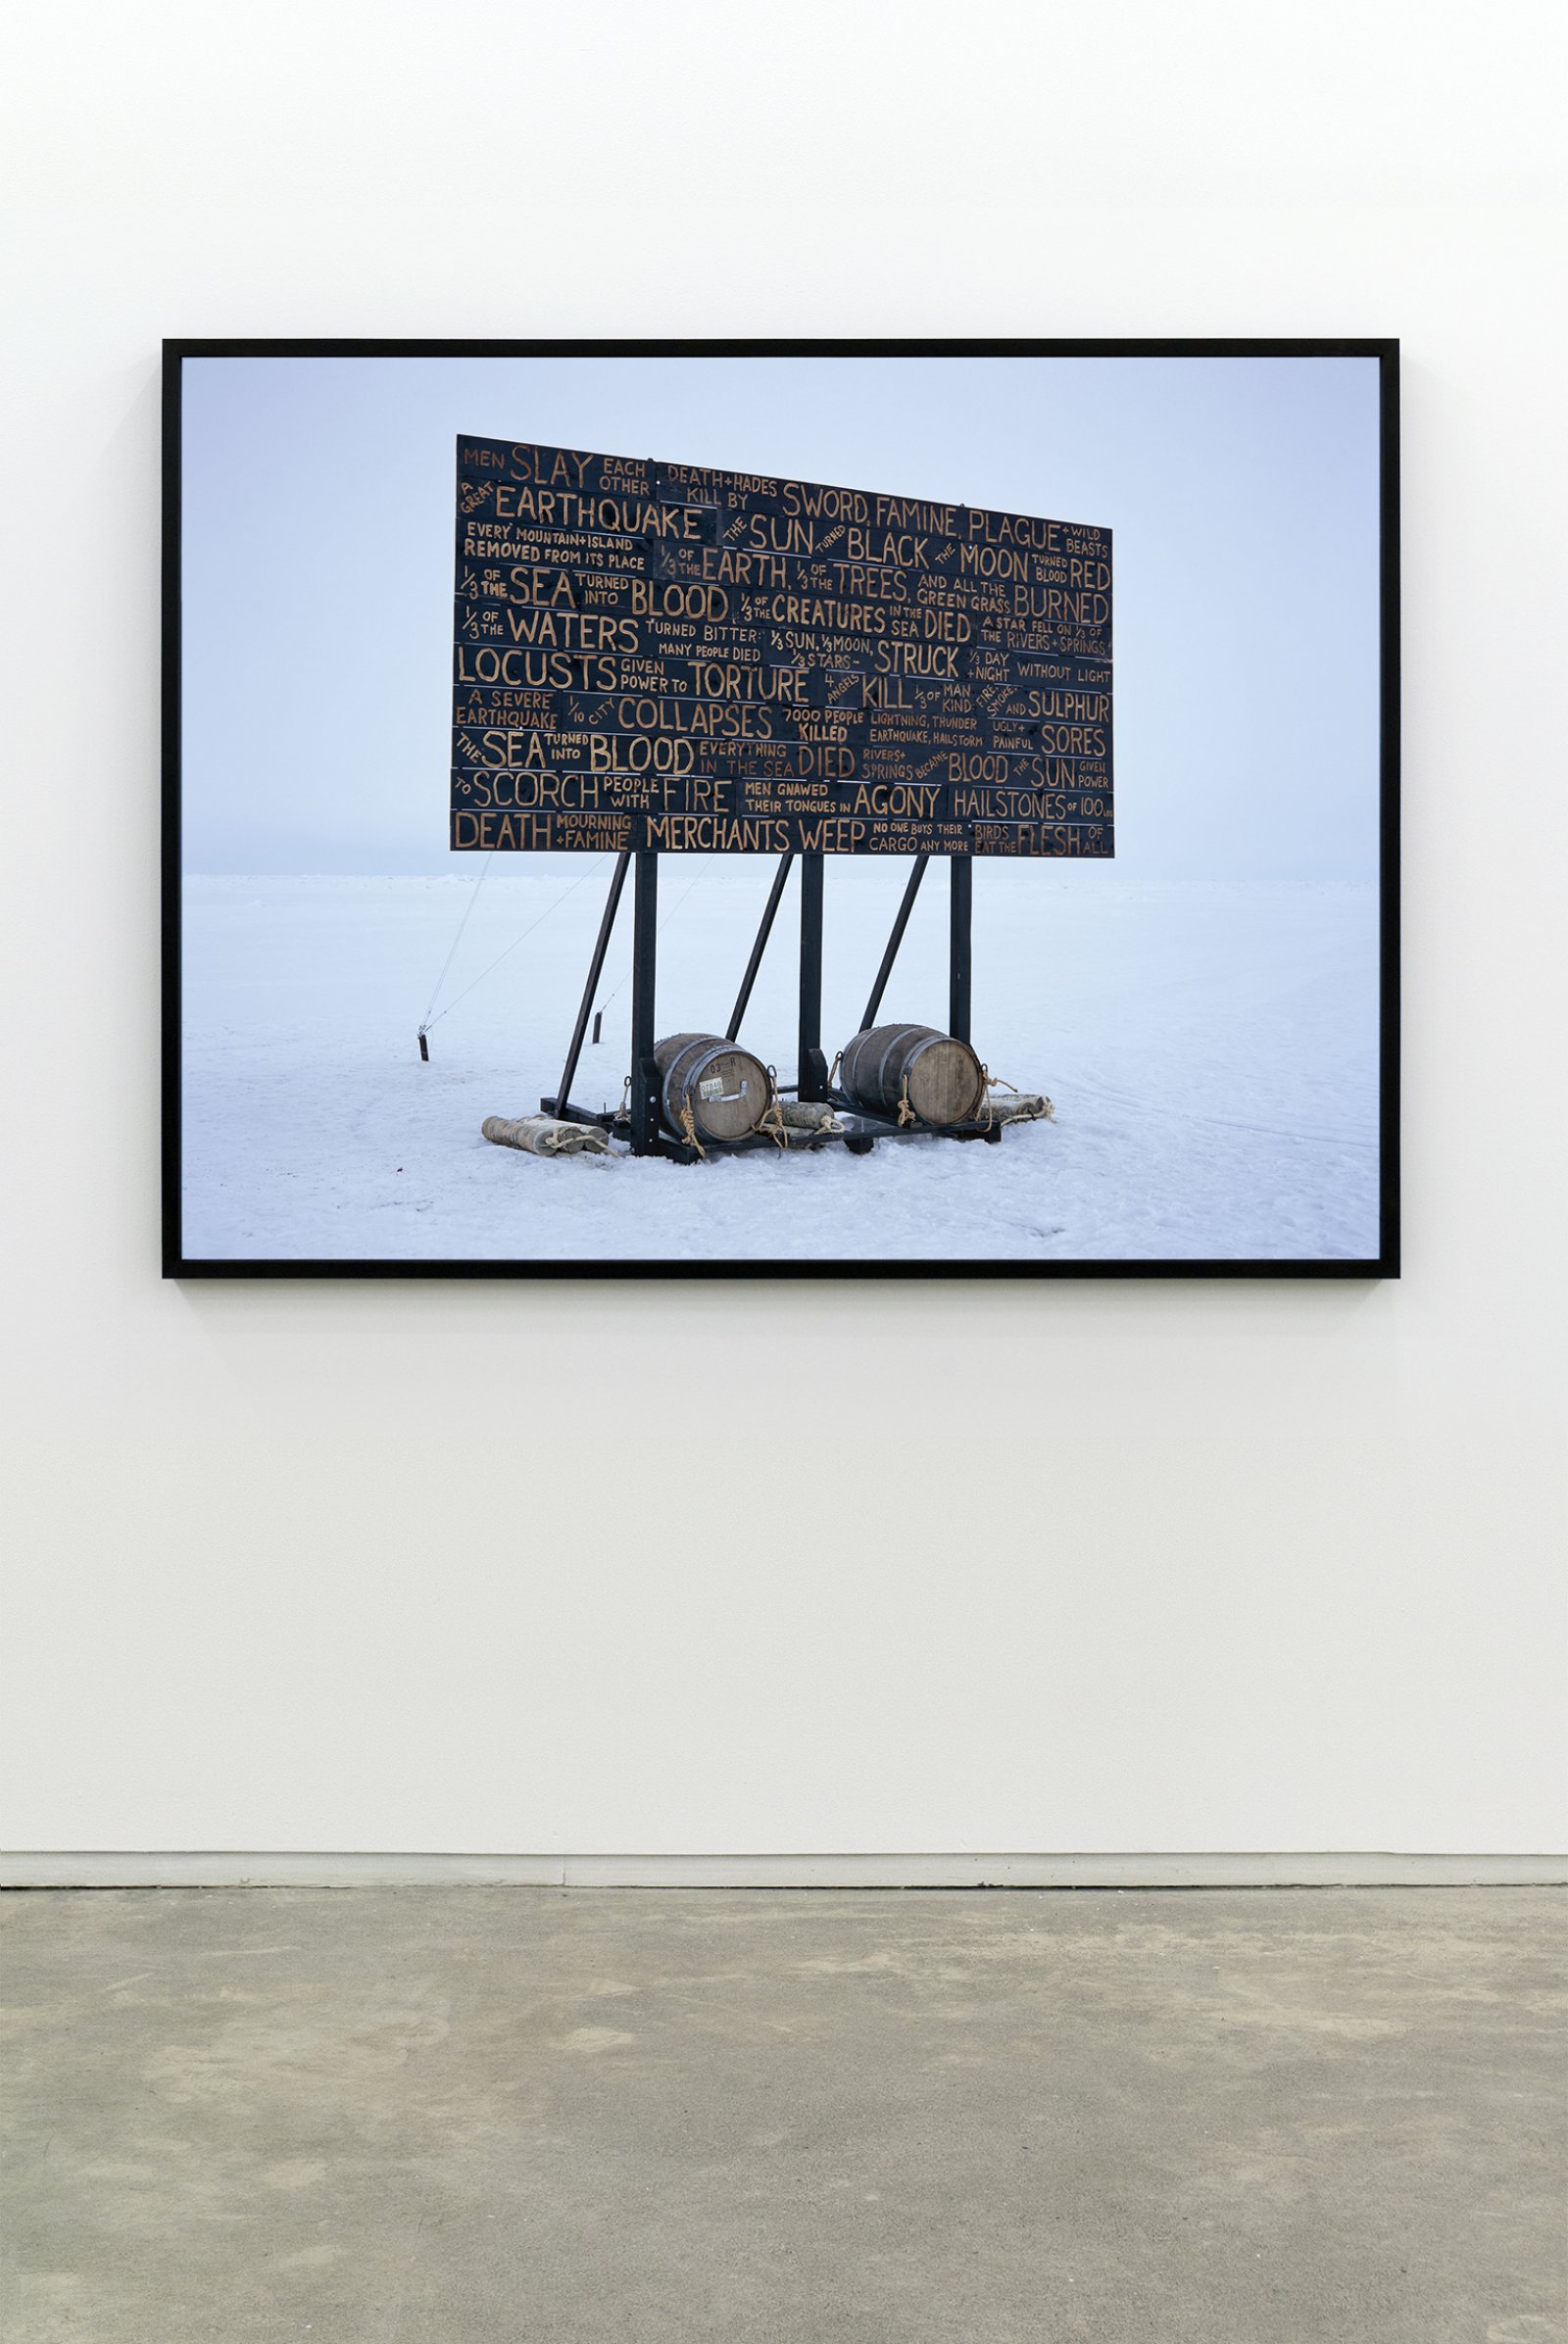 Kevin Schmidt, A Sign in the Northwest Passage (Museum Photograph), 2010, c-print, cedar frame, 64 x 49 in. (163 x 124 cm)